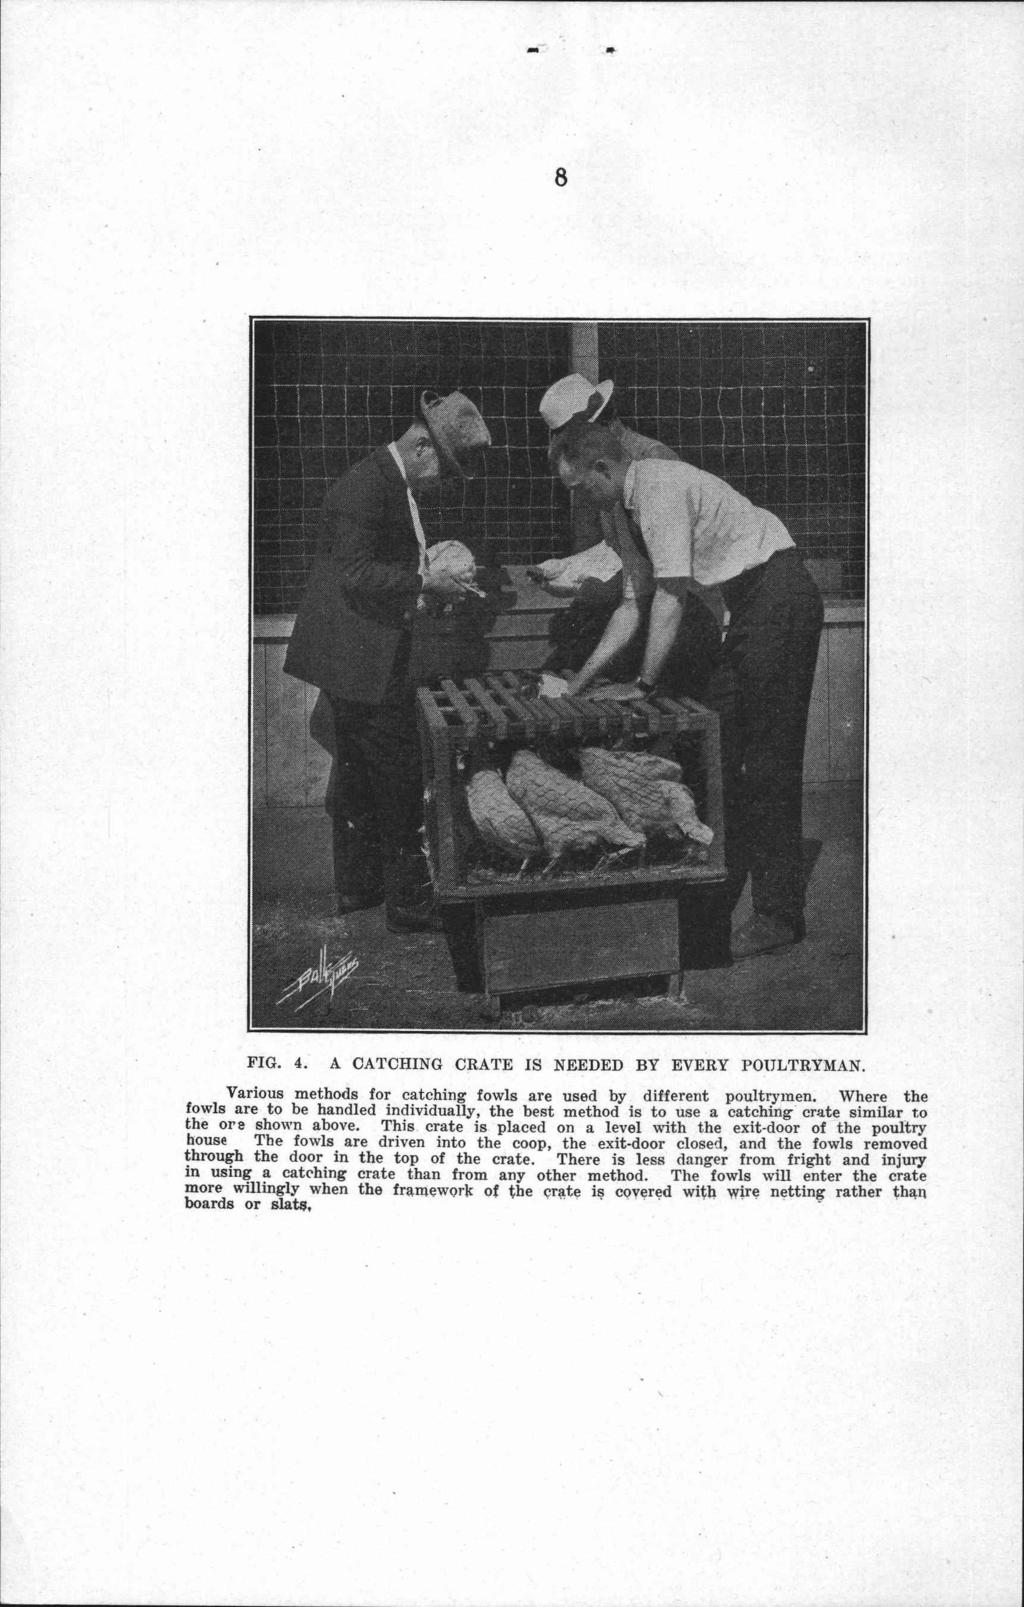 8 FIG. 4. A CATCHING CRATE IS NEEDED BY EVERY POULTRYMAN. Various methods for catching fowls are used by different poultrymen.